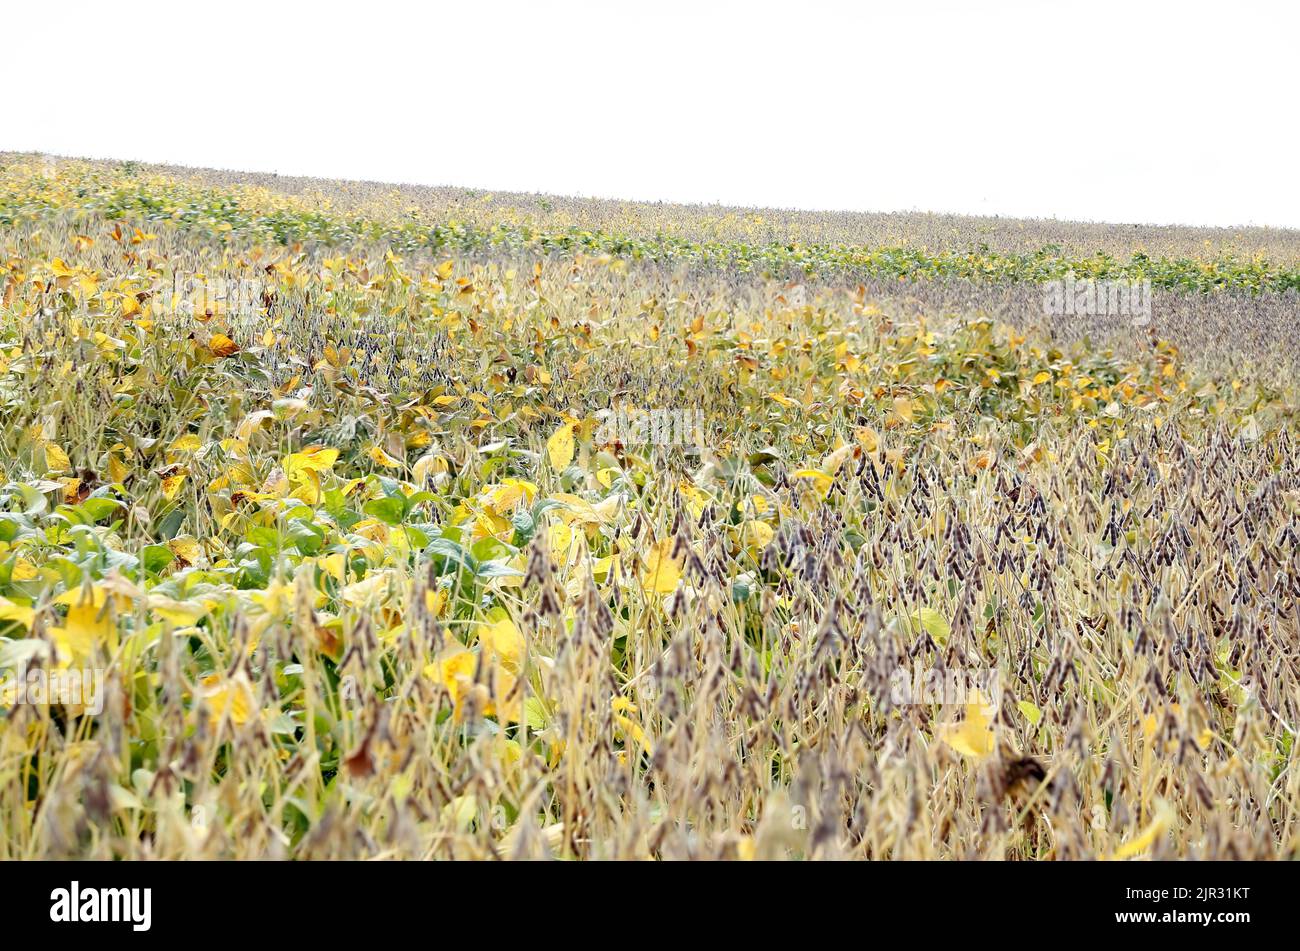 Soybean crop and soybean plants growing in rows ready for harvest Stock Photo